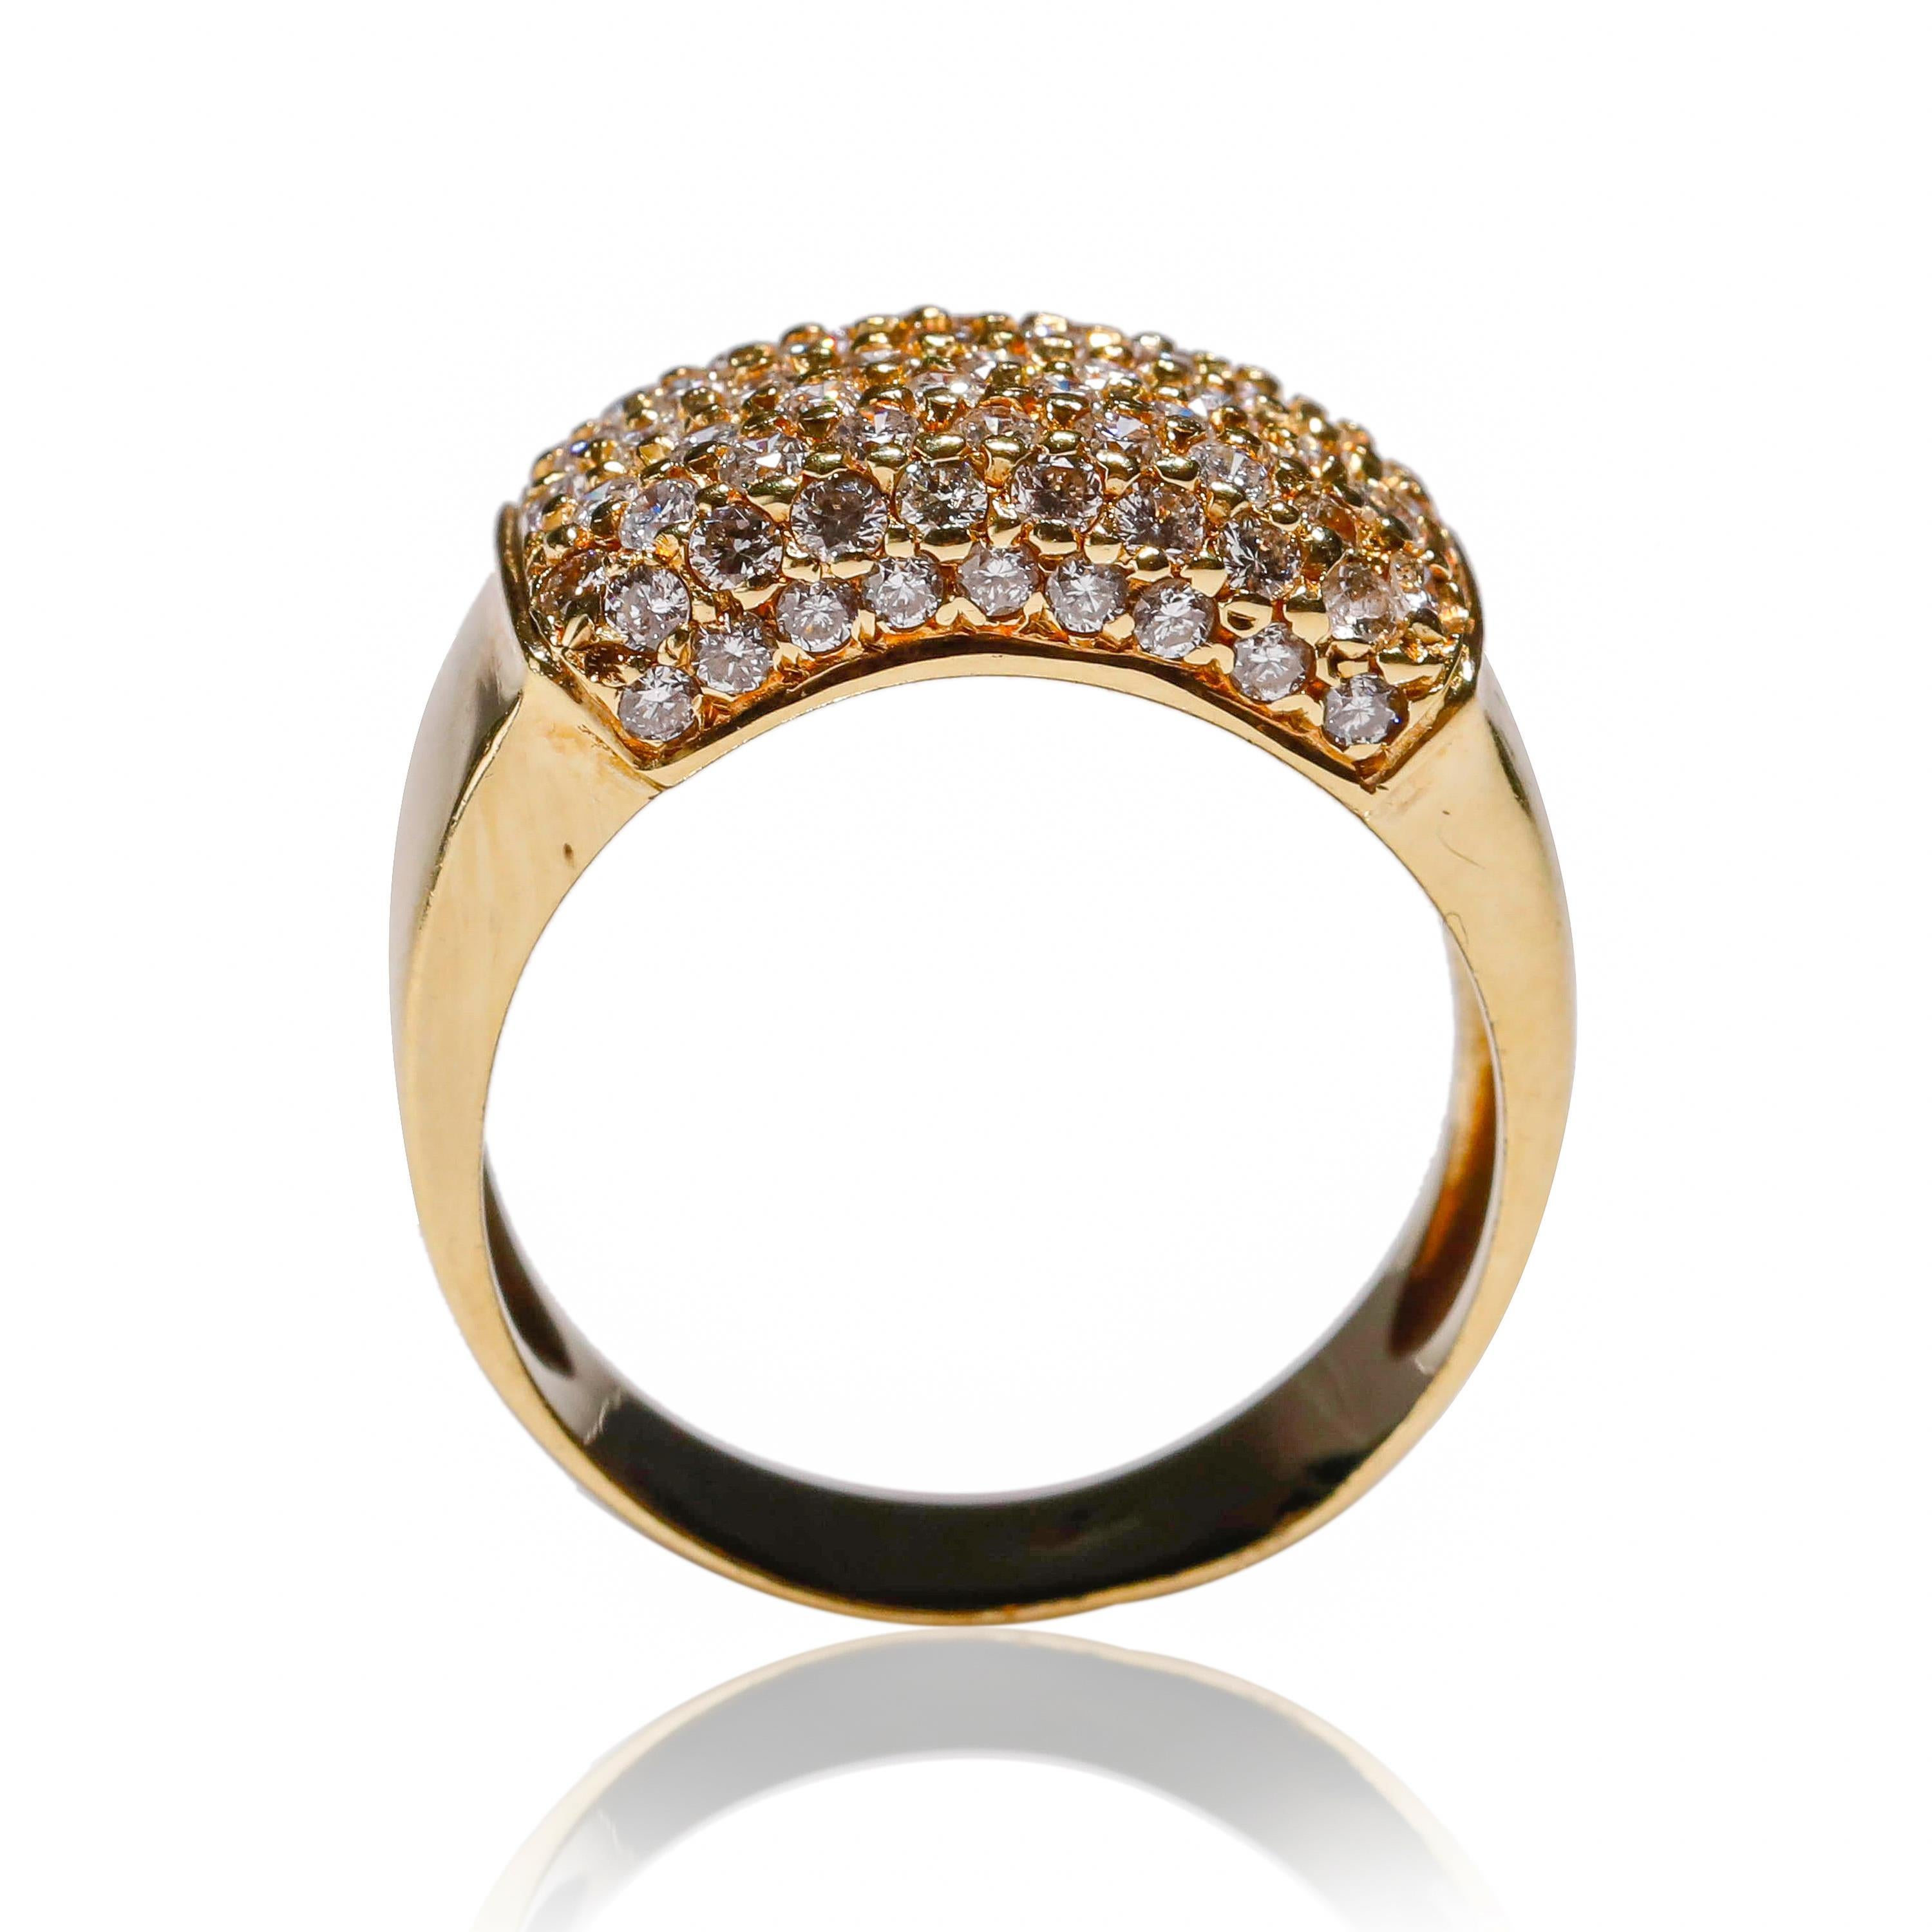 14 Karat Yellow Gold 1.54 Carat Round Cut Pave Diamond Eternity Band Ring

Crafted in 14 kt Yellow Gold, this Unique design showcases a white Diamond 1 TCW Round Cut diamond, set in a solid Yellow Gold, Polished to a brilliant shine.

Gold Purity: